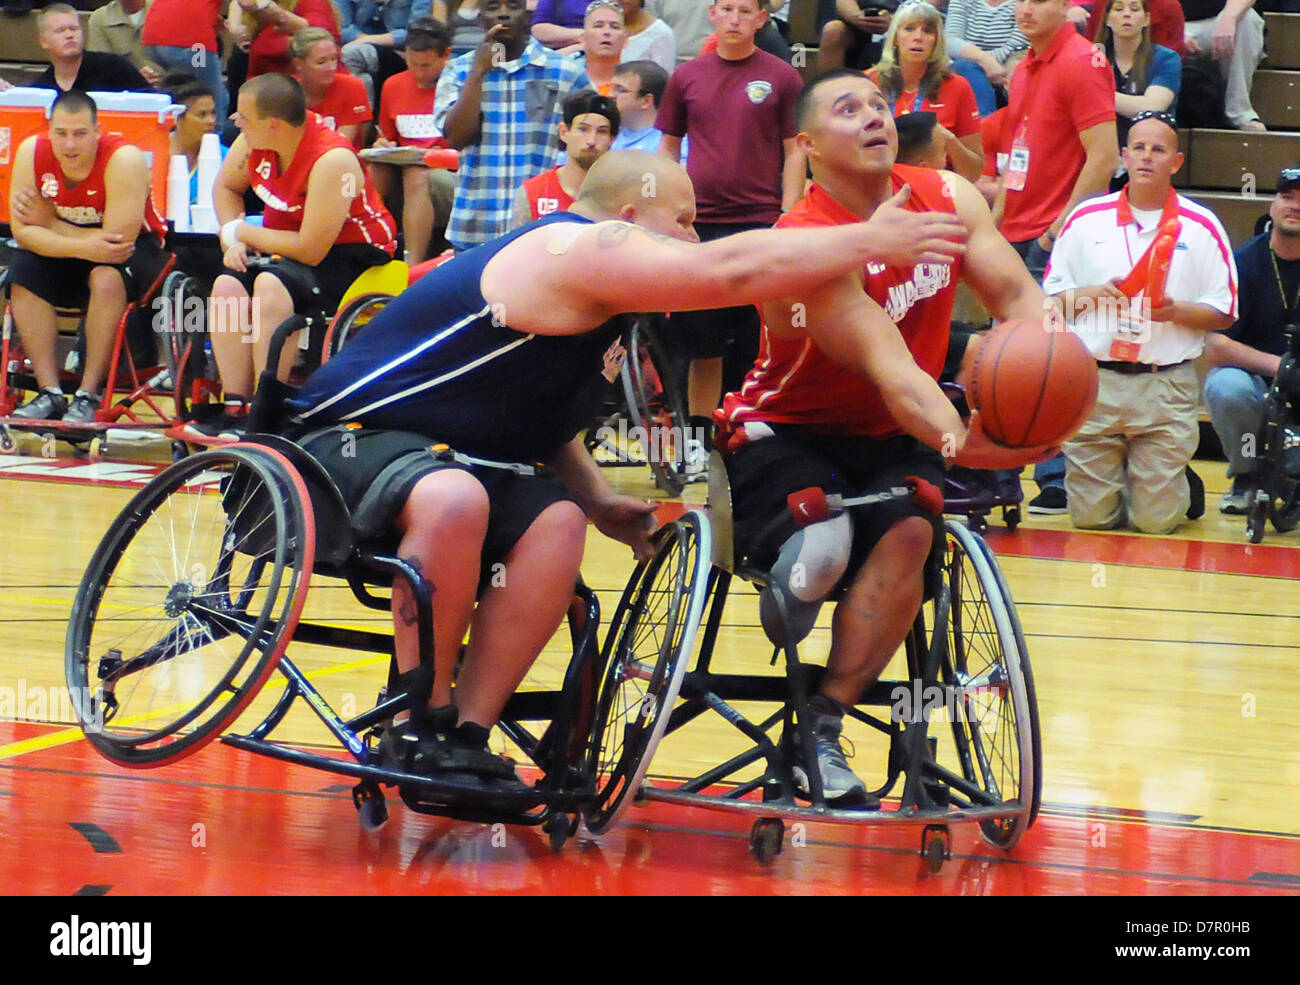 May 12, 2013: Opening round wheelchair basketball action between the Marine Corps and Navy/Coast Guard during the first day of Warrior Games competition at the United States Olympic Training Center, Colorado Springs, Colorado. Over 260 injured and disabled service men and women have gathered in Colorado Springs to compete in seven sports, May 11-16. All branches of the military are represented, including Special Operations and members of the British Armed Forces. Stock Photo